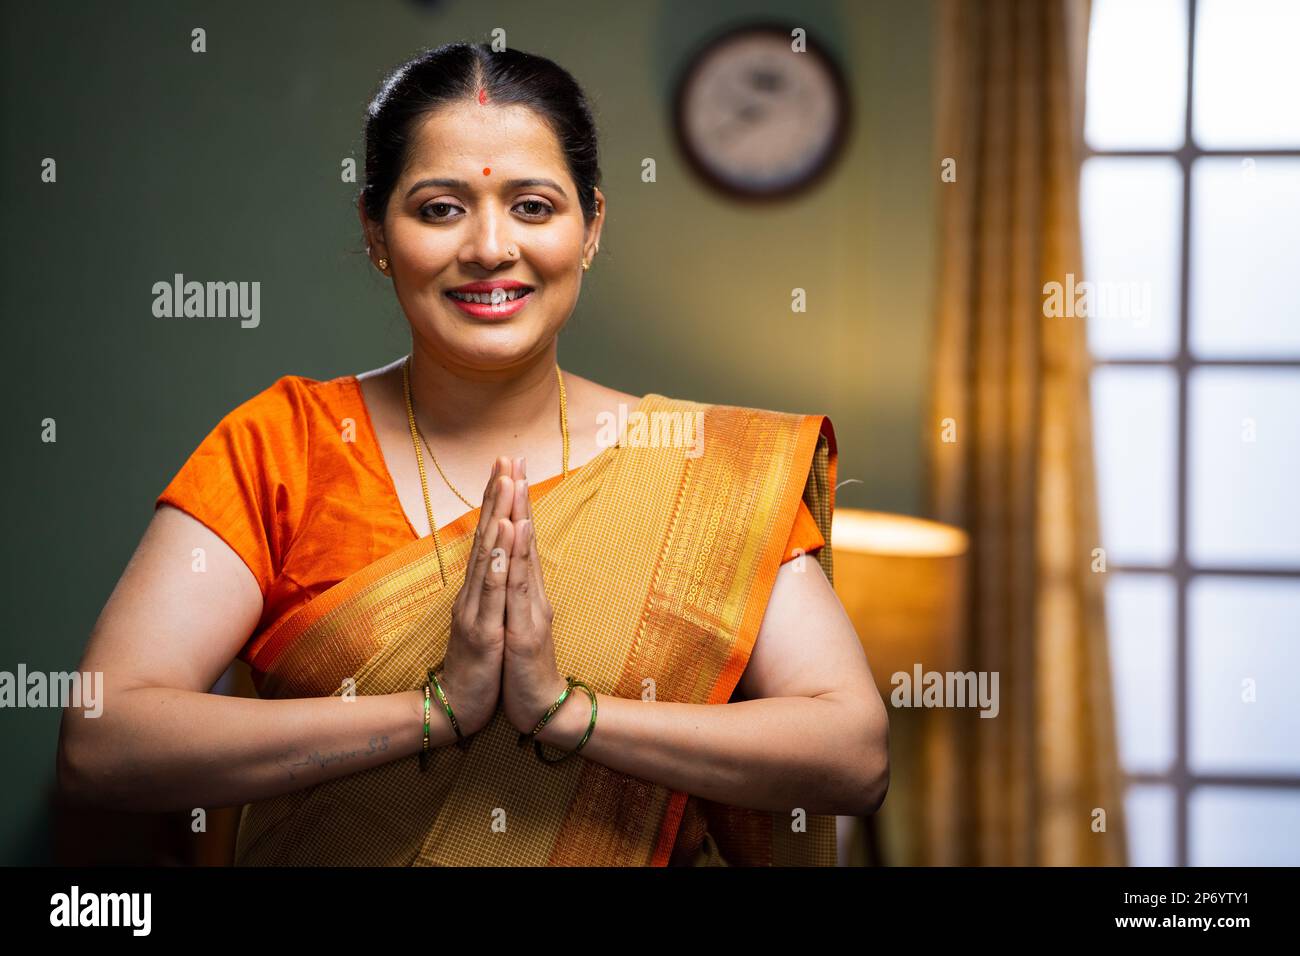 Happy smiling woman doing namaste or greeting by looking at camera - concept of welcome gesture, respect and gratitude Stock Photo